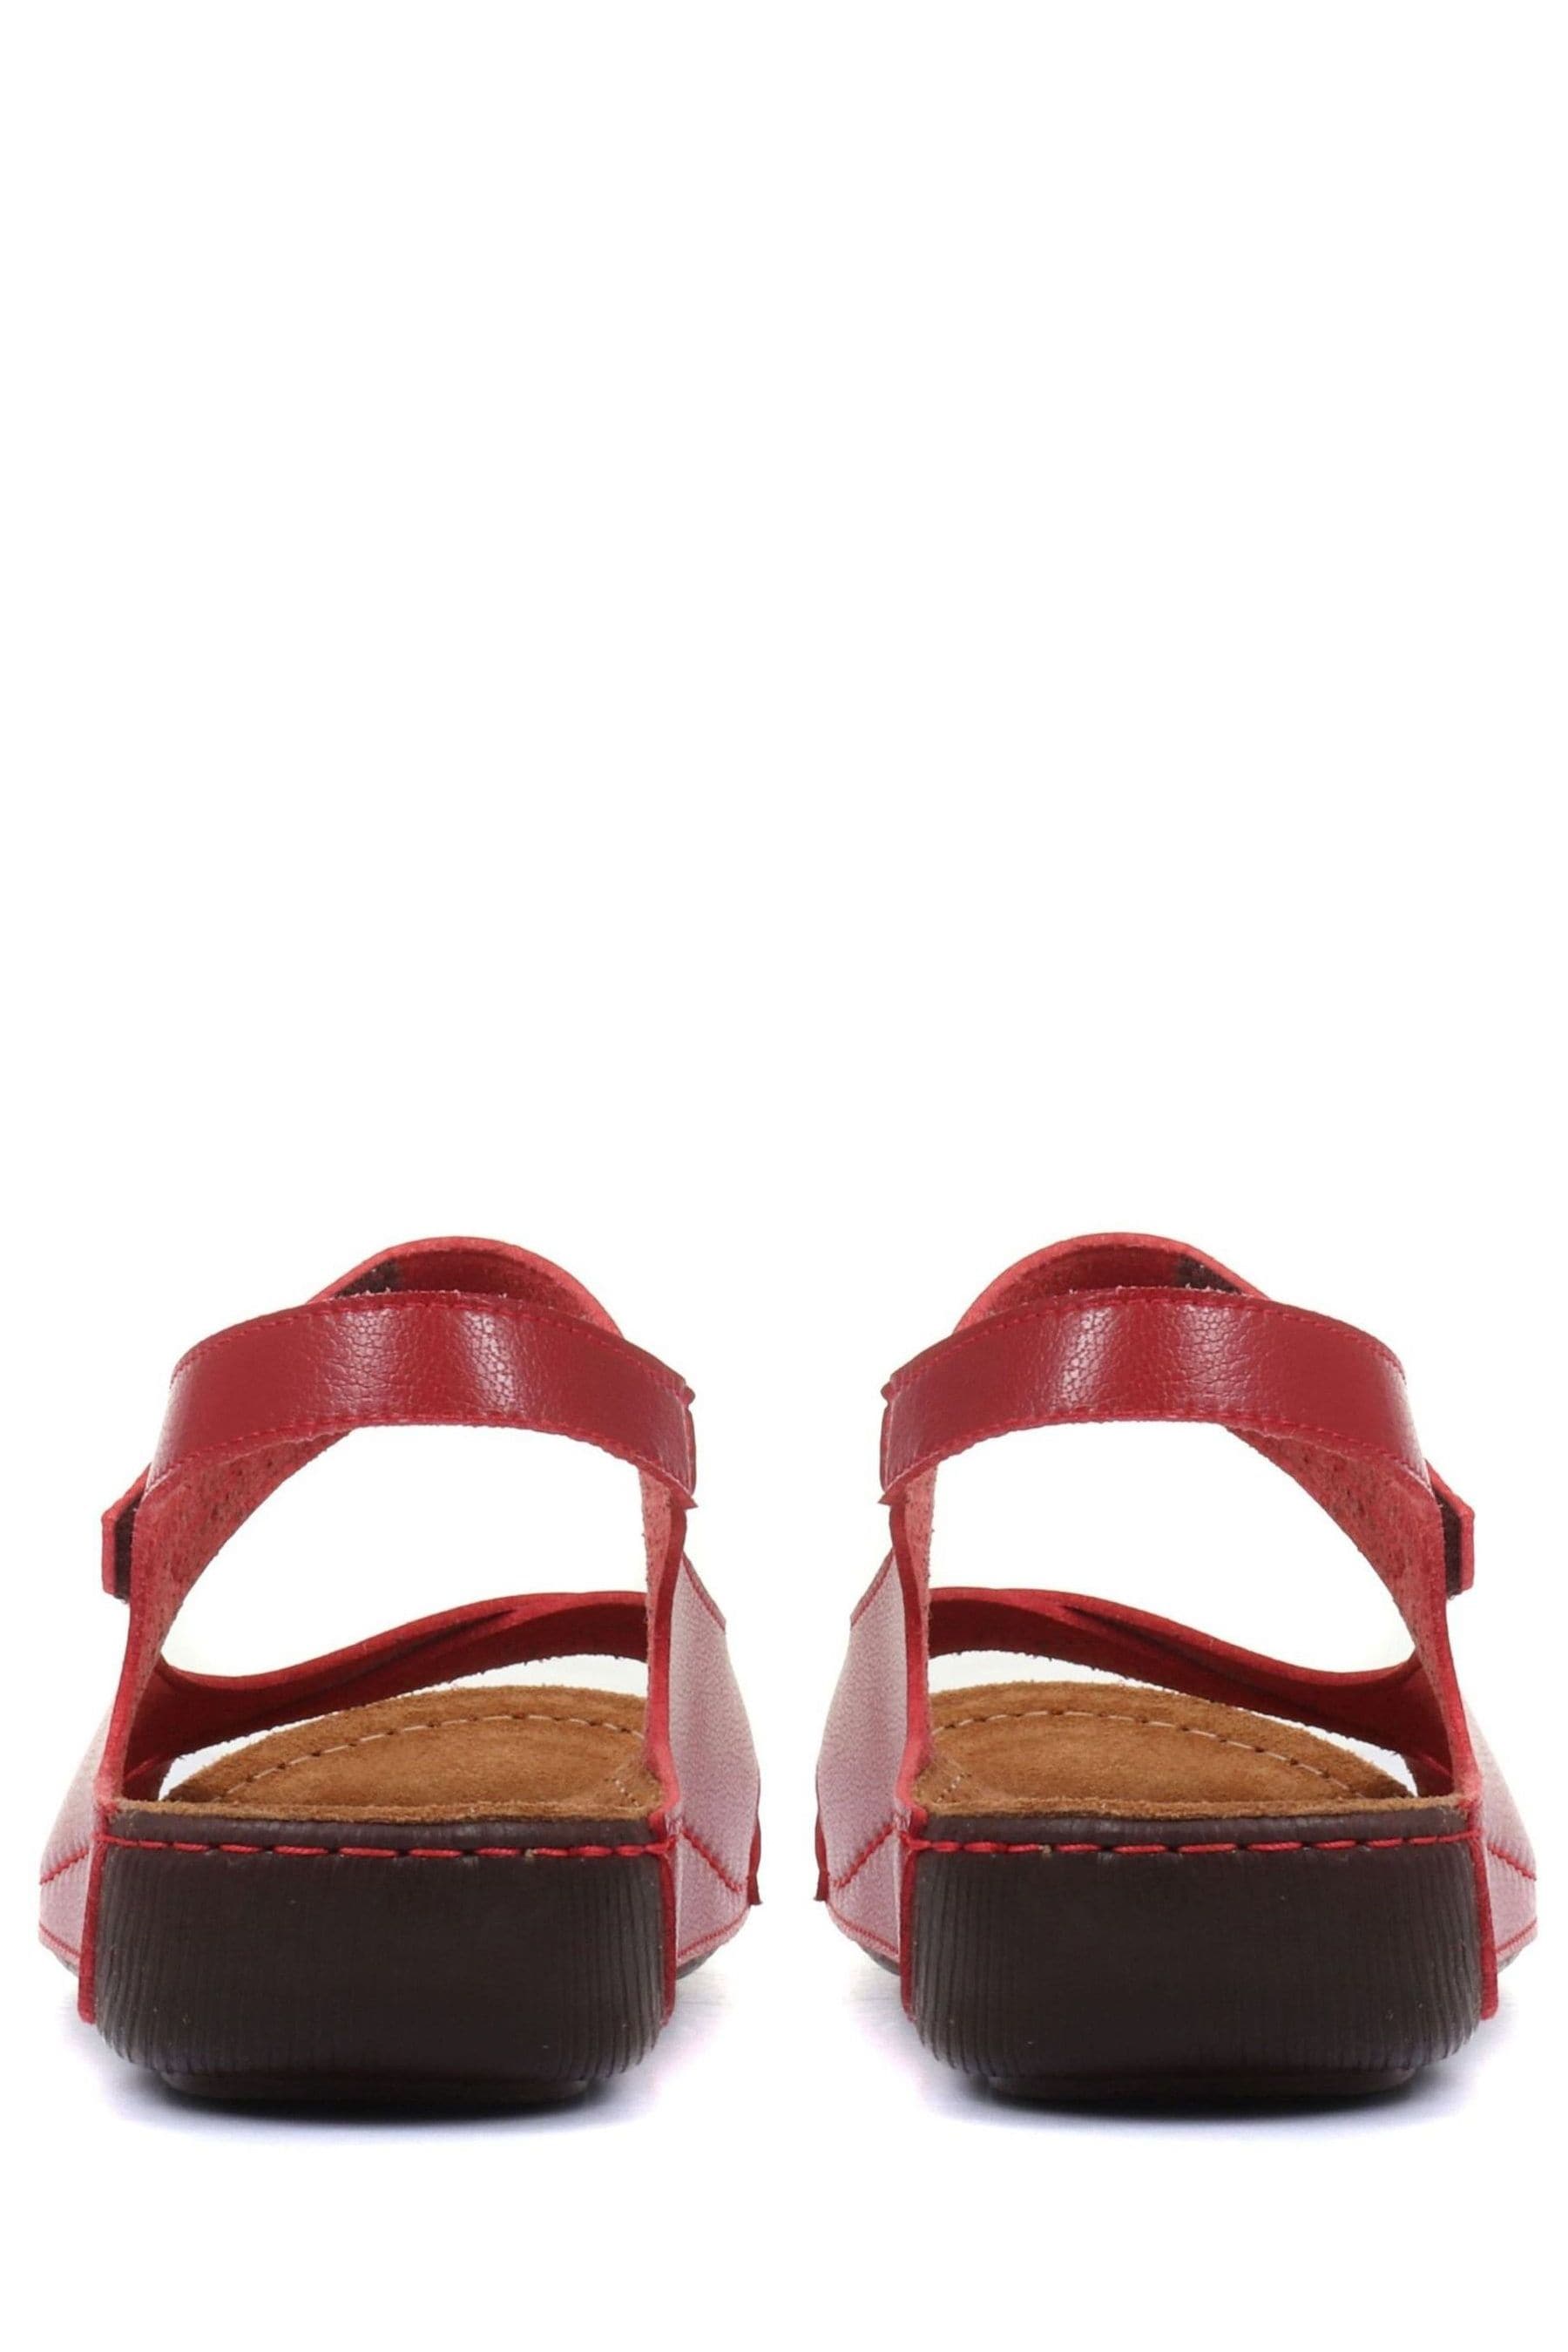 Buy Pavers Red Ladies Touch Fasten Sandals from the Next UK online shop